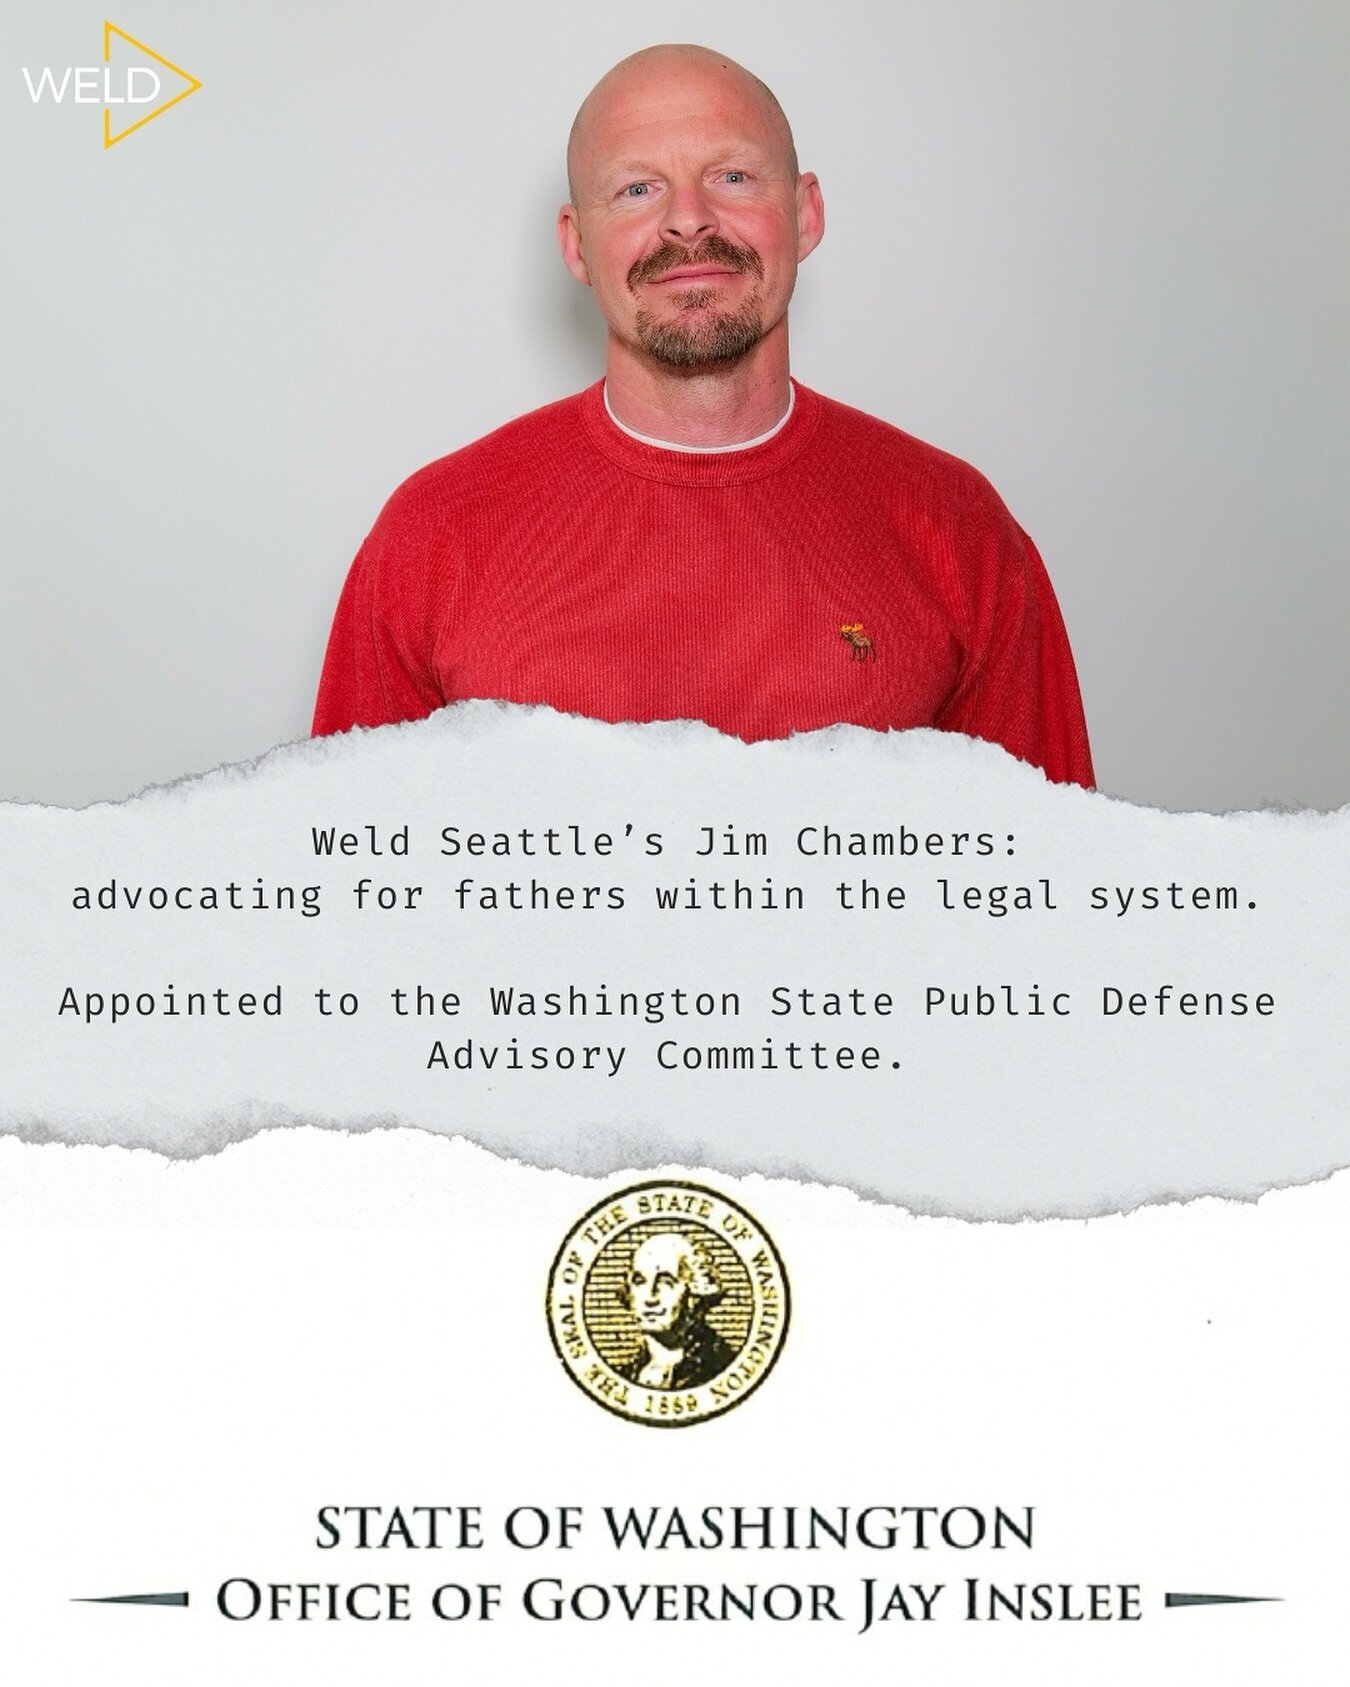 We are proud to highlight our very own Jim Chambers for his recent appointment to the Washington State Office of Public Defense Advisory Committee, a significant step forward in advocating for fathers within the legal system. Jim&rsquo;s journey to t